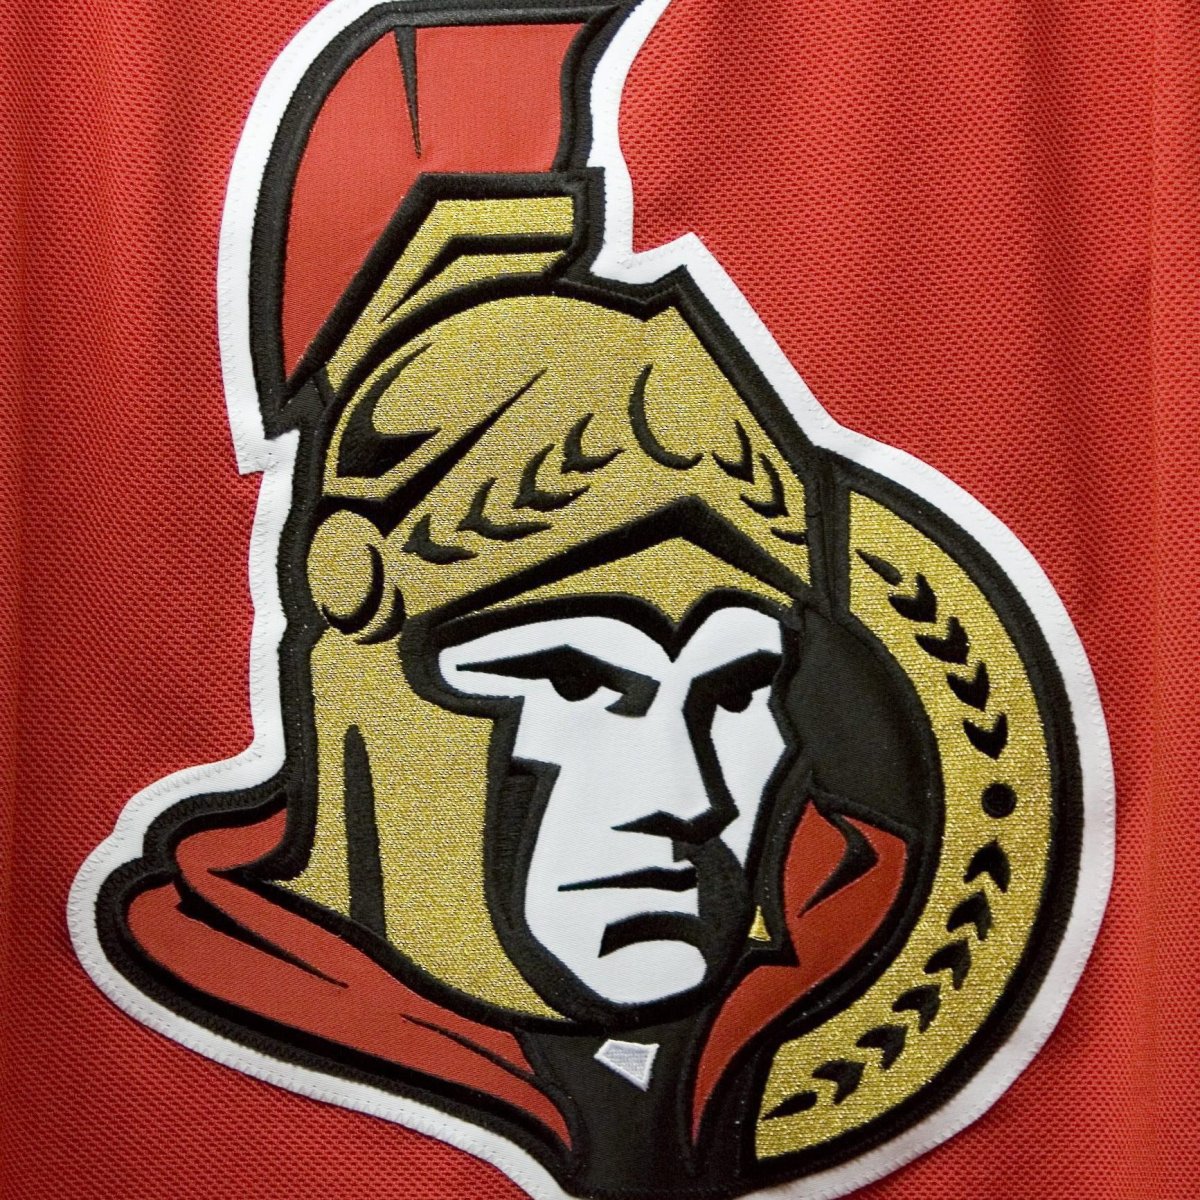 The new logo on the Ottawa Senators jersey is seen at its unveiling in Ottawa on Wednesday, Aug. 22, 2007. The Ottawa Senators say four additional members of the organization have tested positive for COVID-19, bringing the total to six.